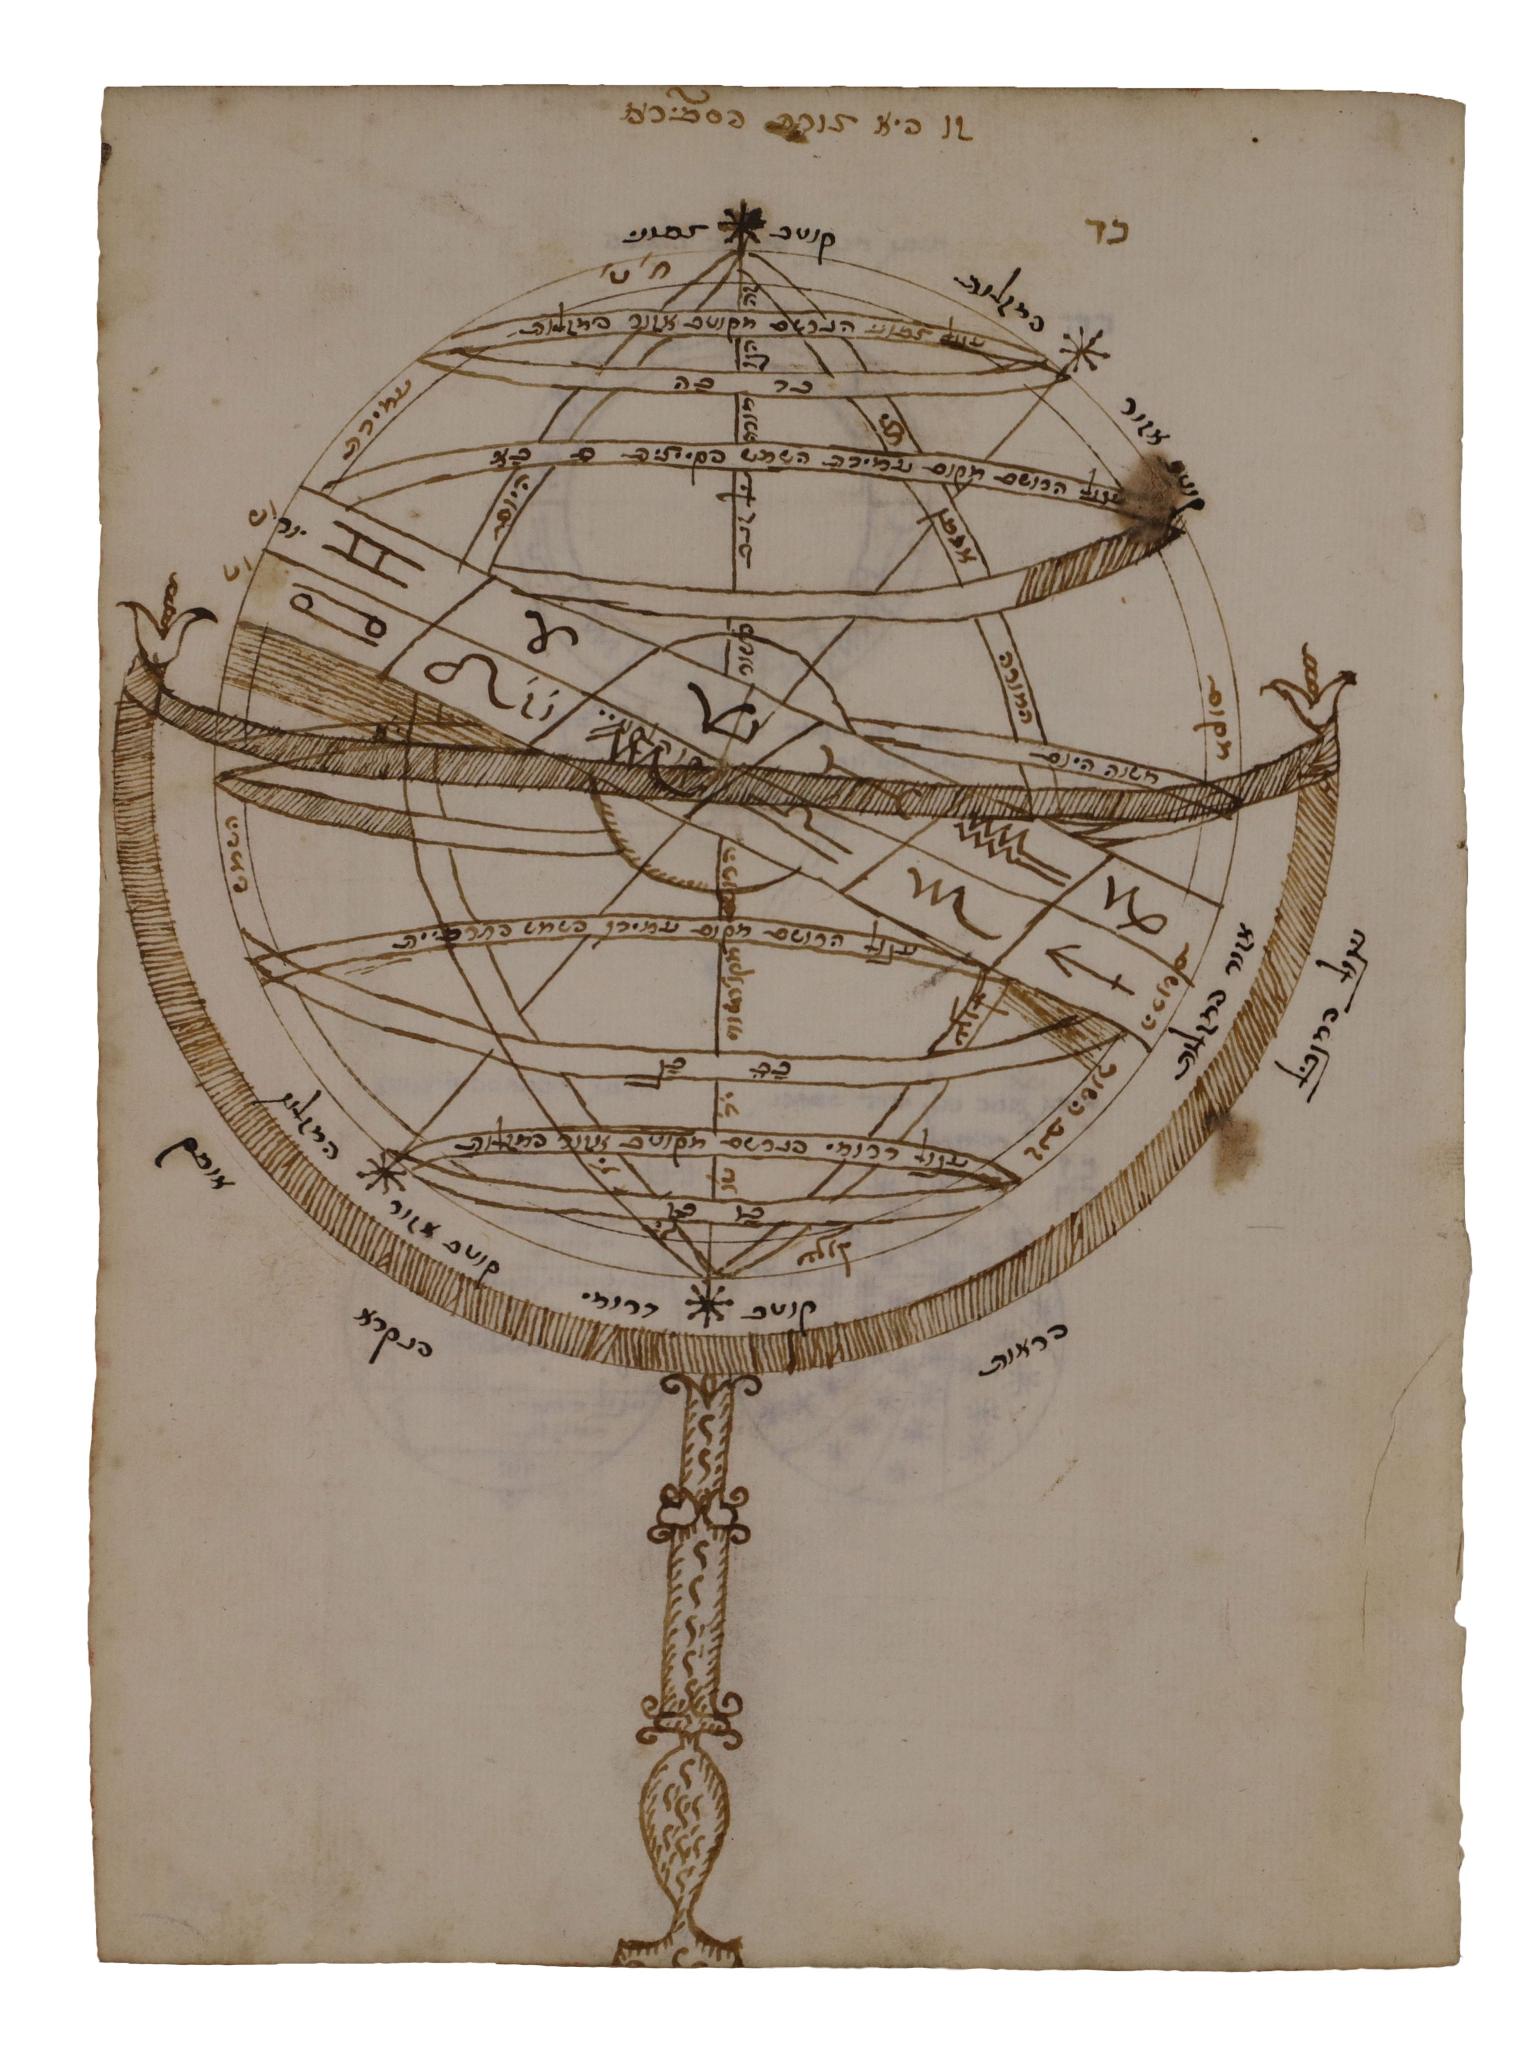 Illustration of a sphere circled by rings at various angles, including illustrations of zodiac symbols.